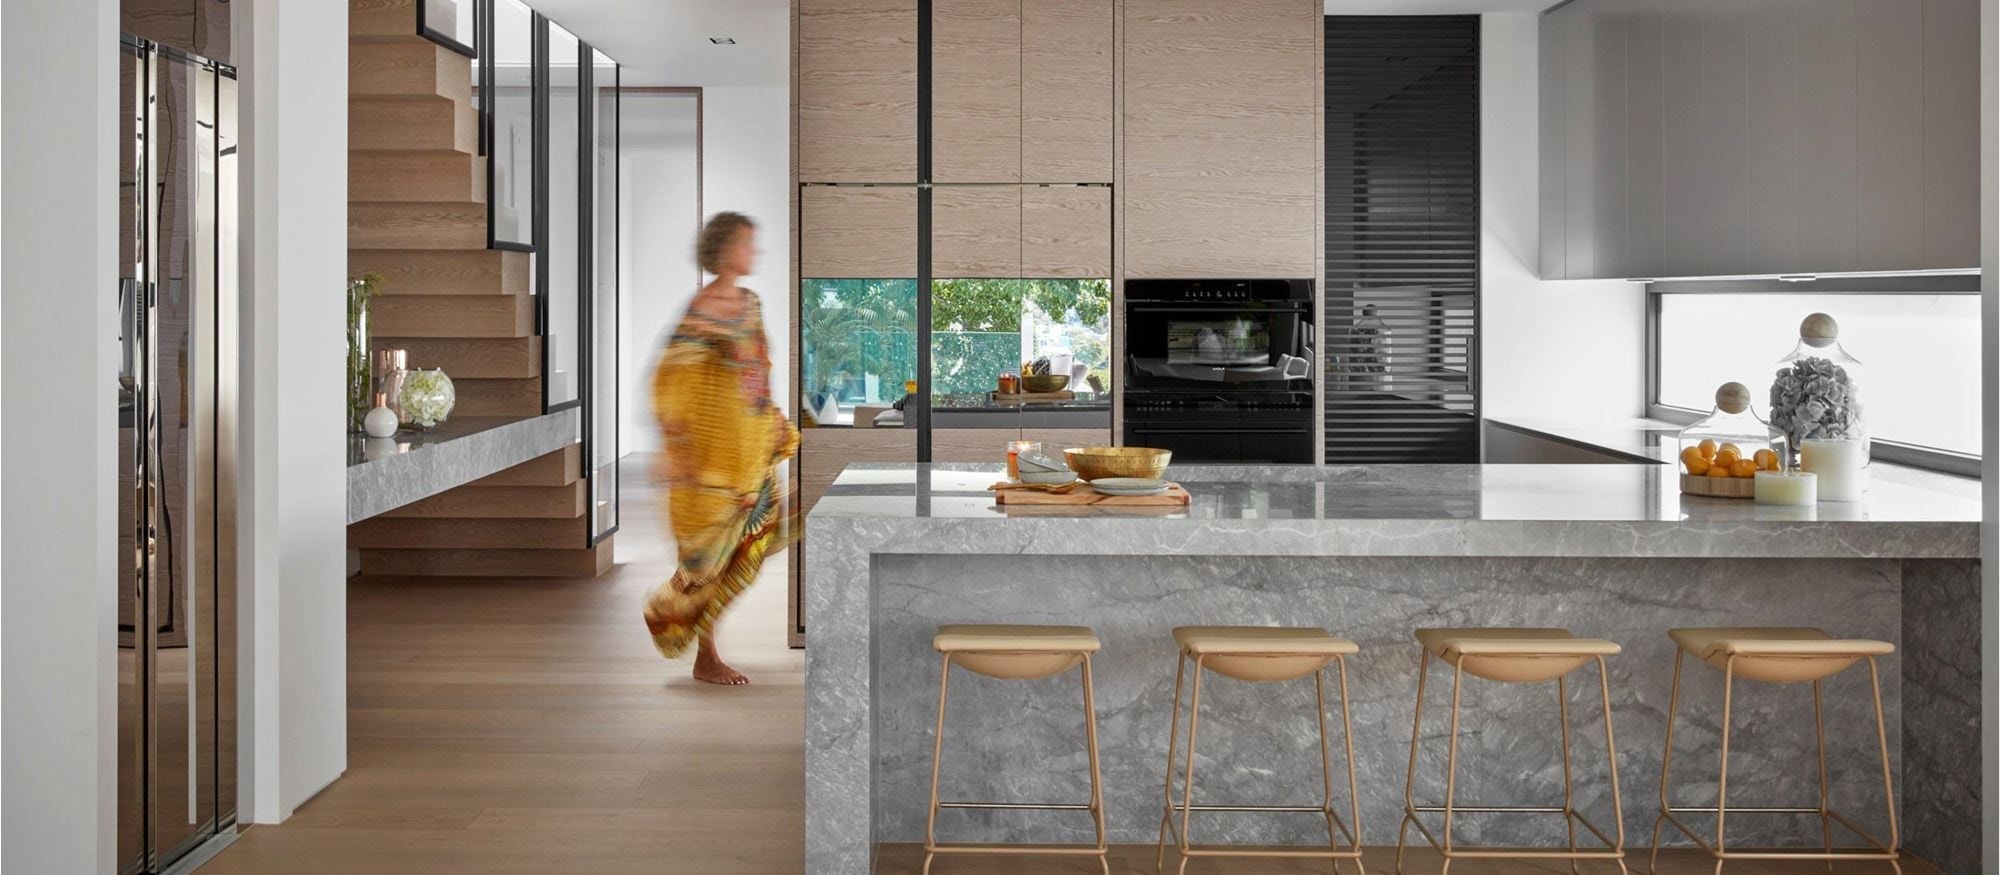 Wolf 30" Contemporary single oven in Copelen Street by Erika Lancini.